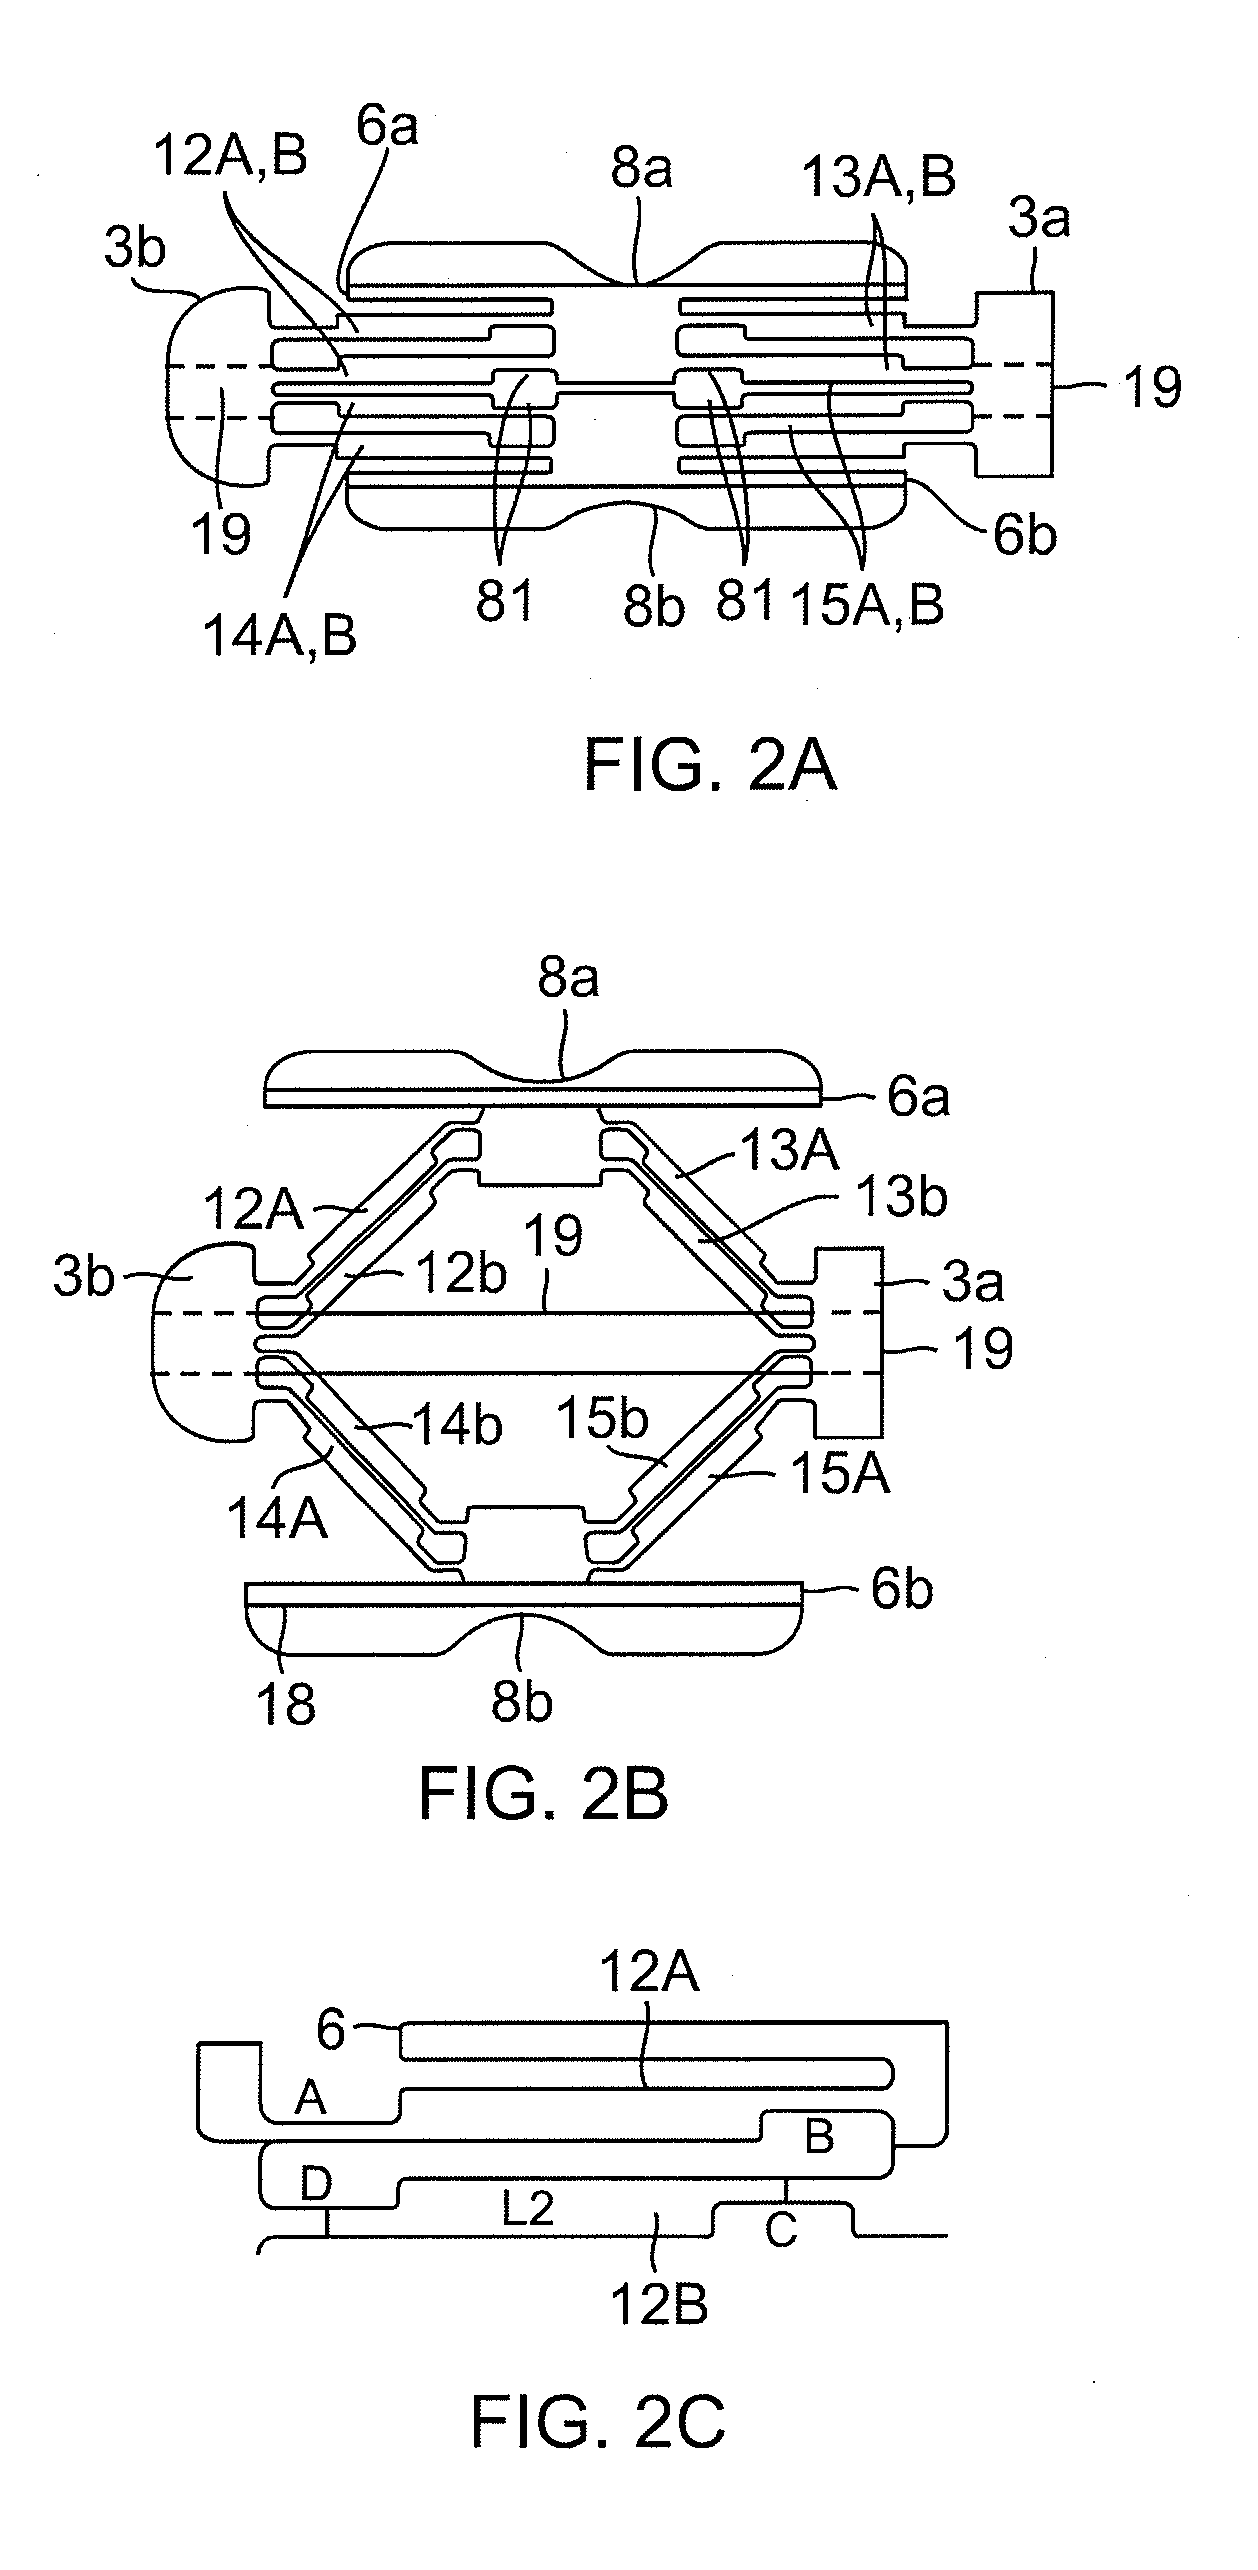 Apparatus for restoration of the spine and methods of use thereof